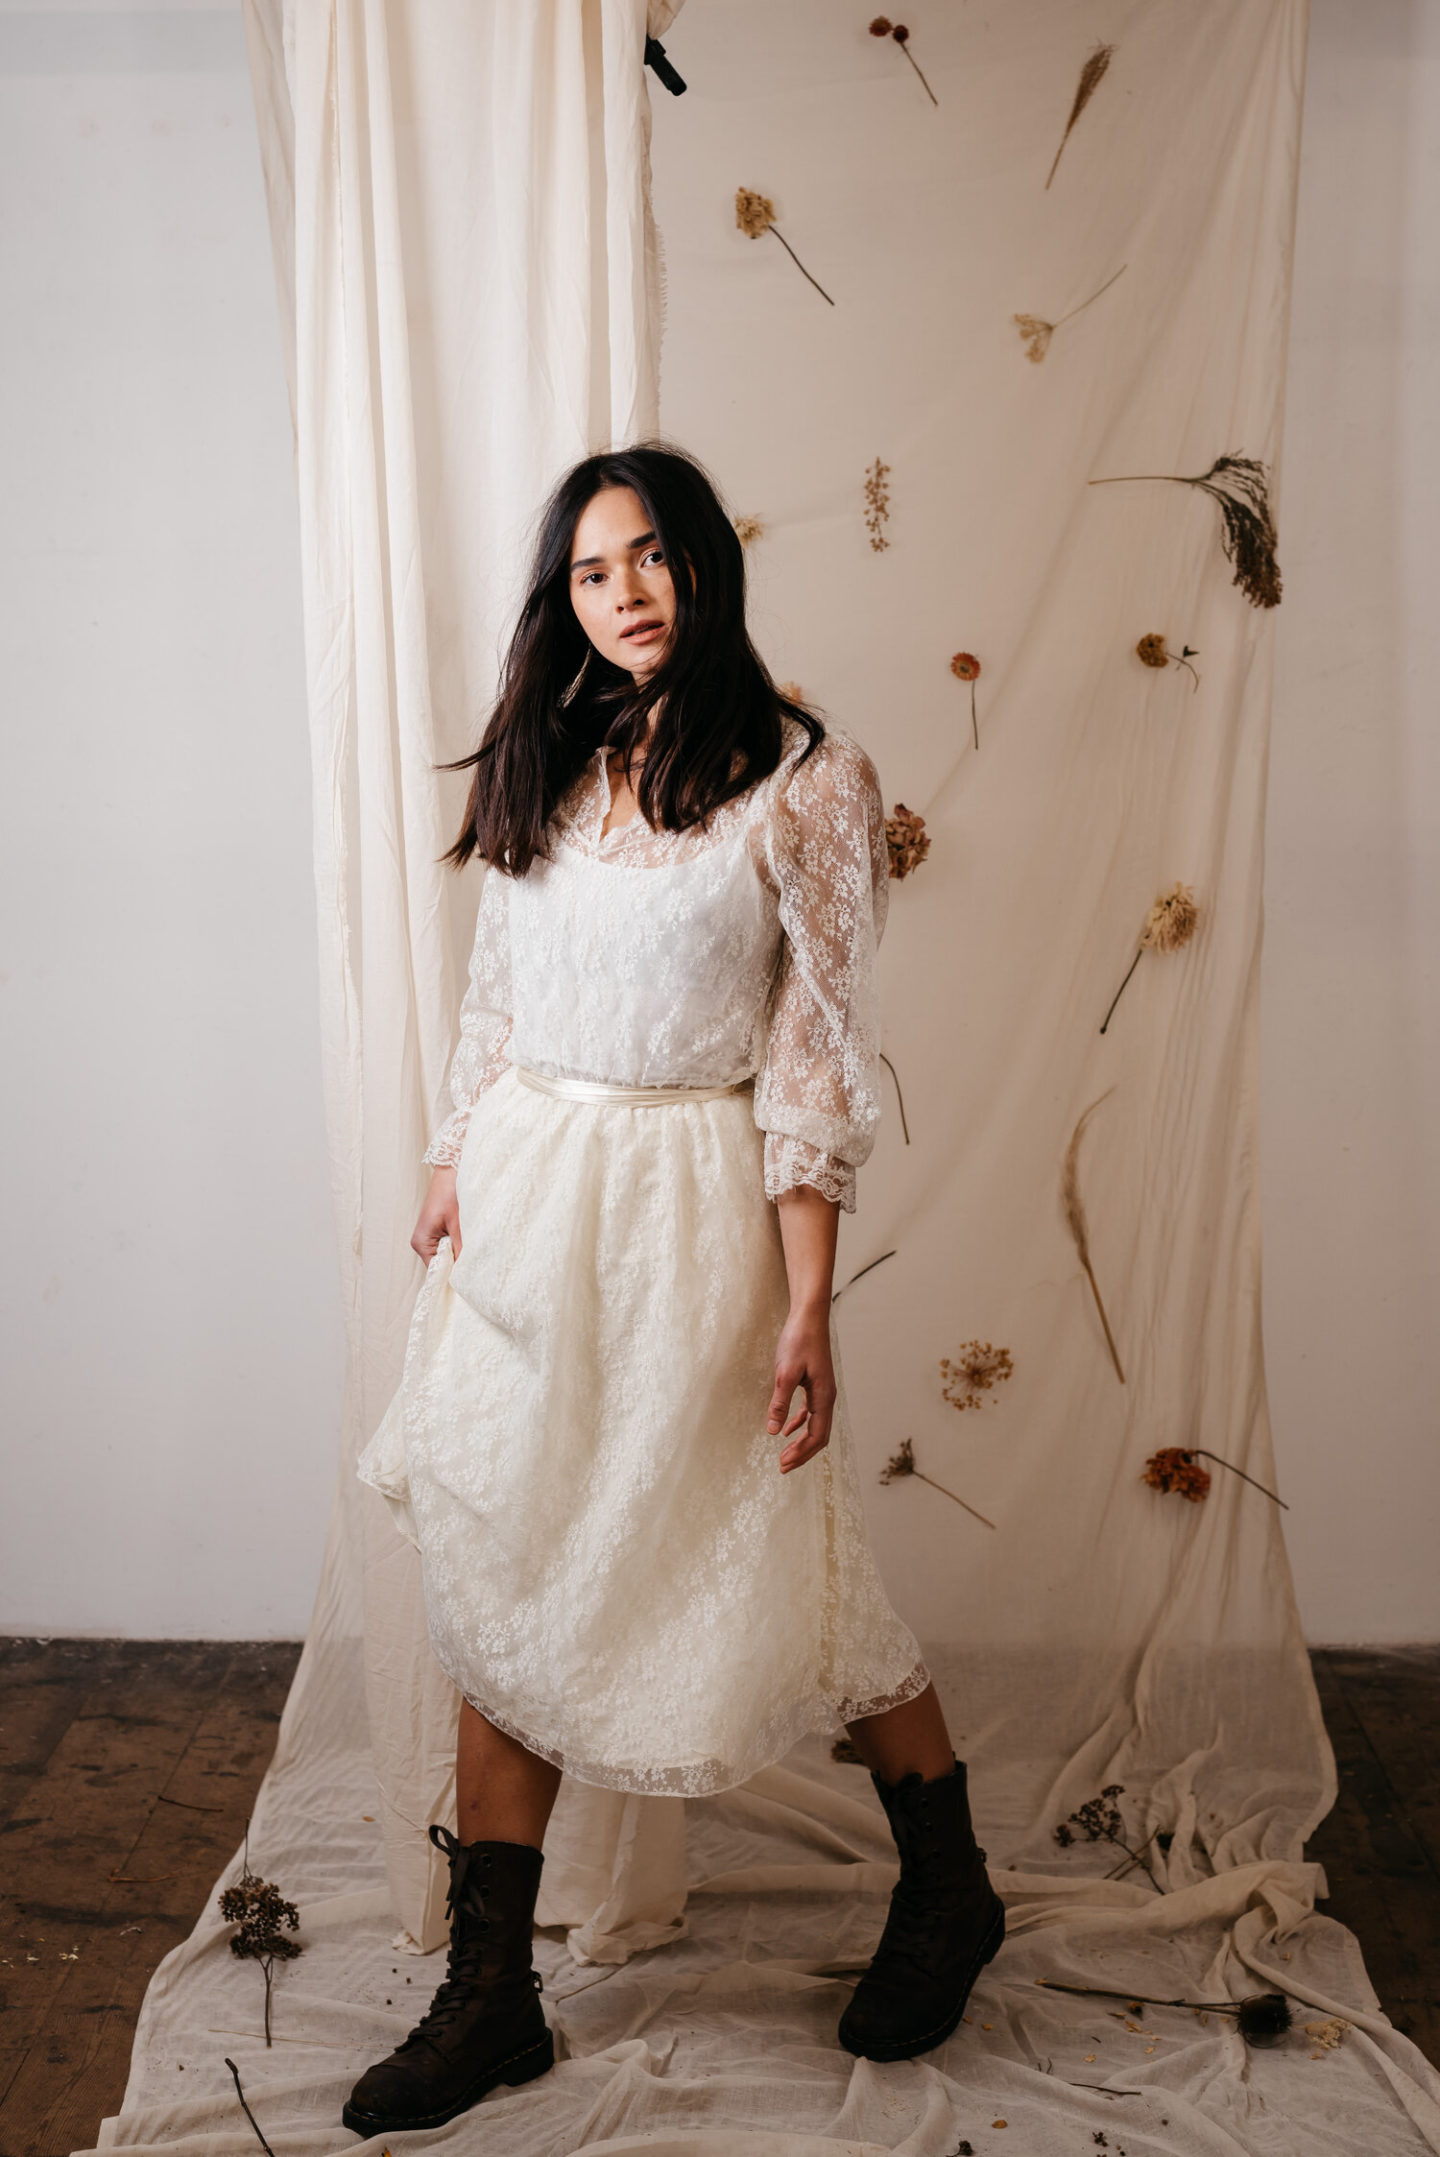 Our Favourite UK Vintage/Pre-Loved Ethical Wedding Dress Designers